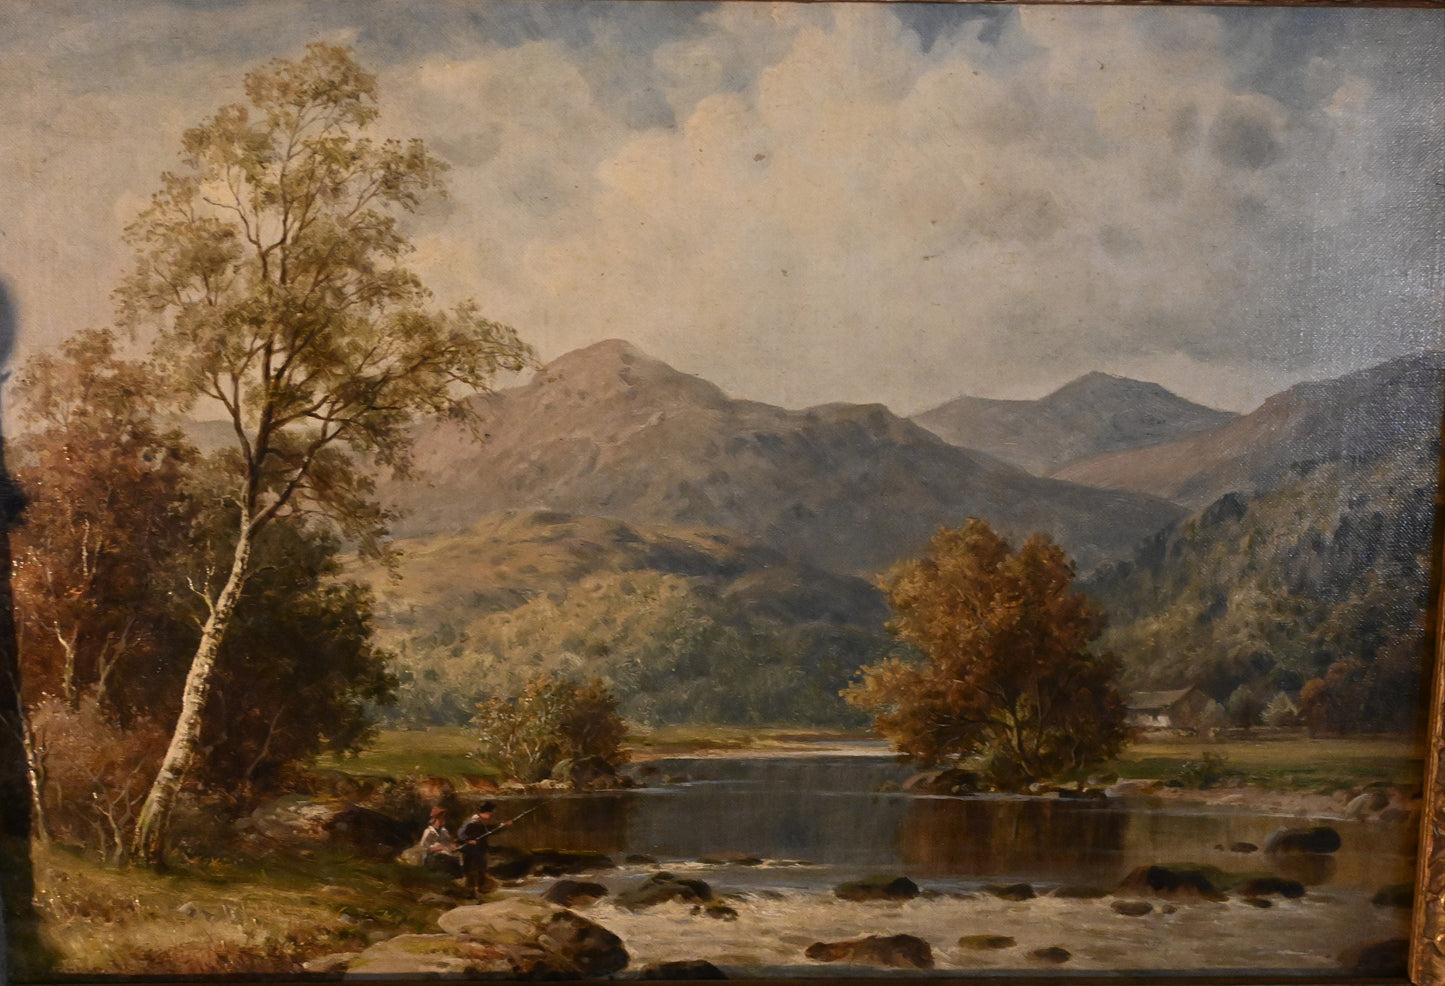 William E. Harris (England 1860 - 1930) Original Oil - 18"H x 24"W- "In The Mawddach Valley" Well listed -High auction & galley prices!